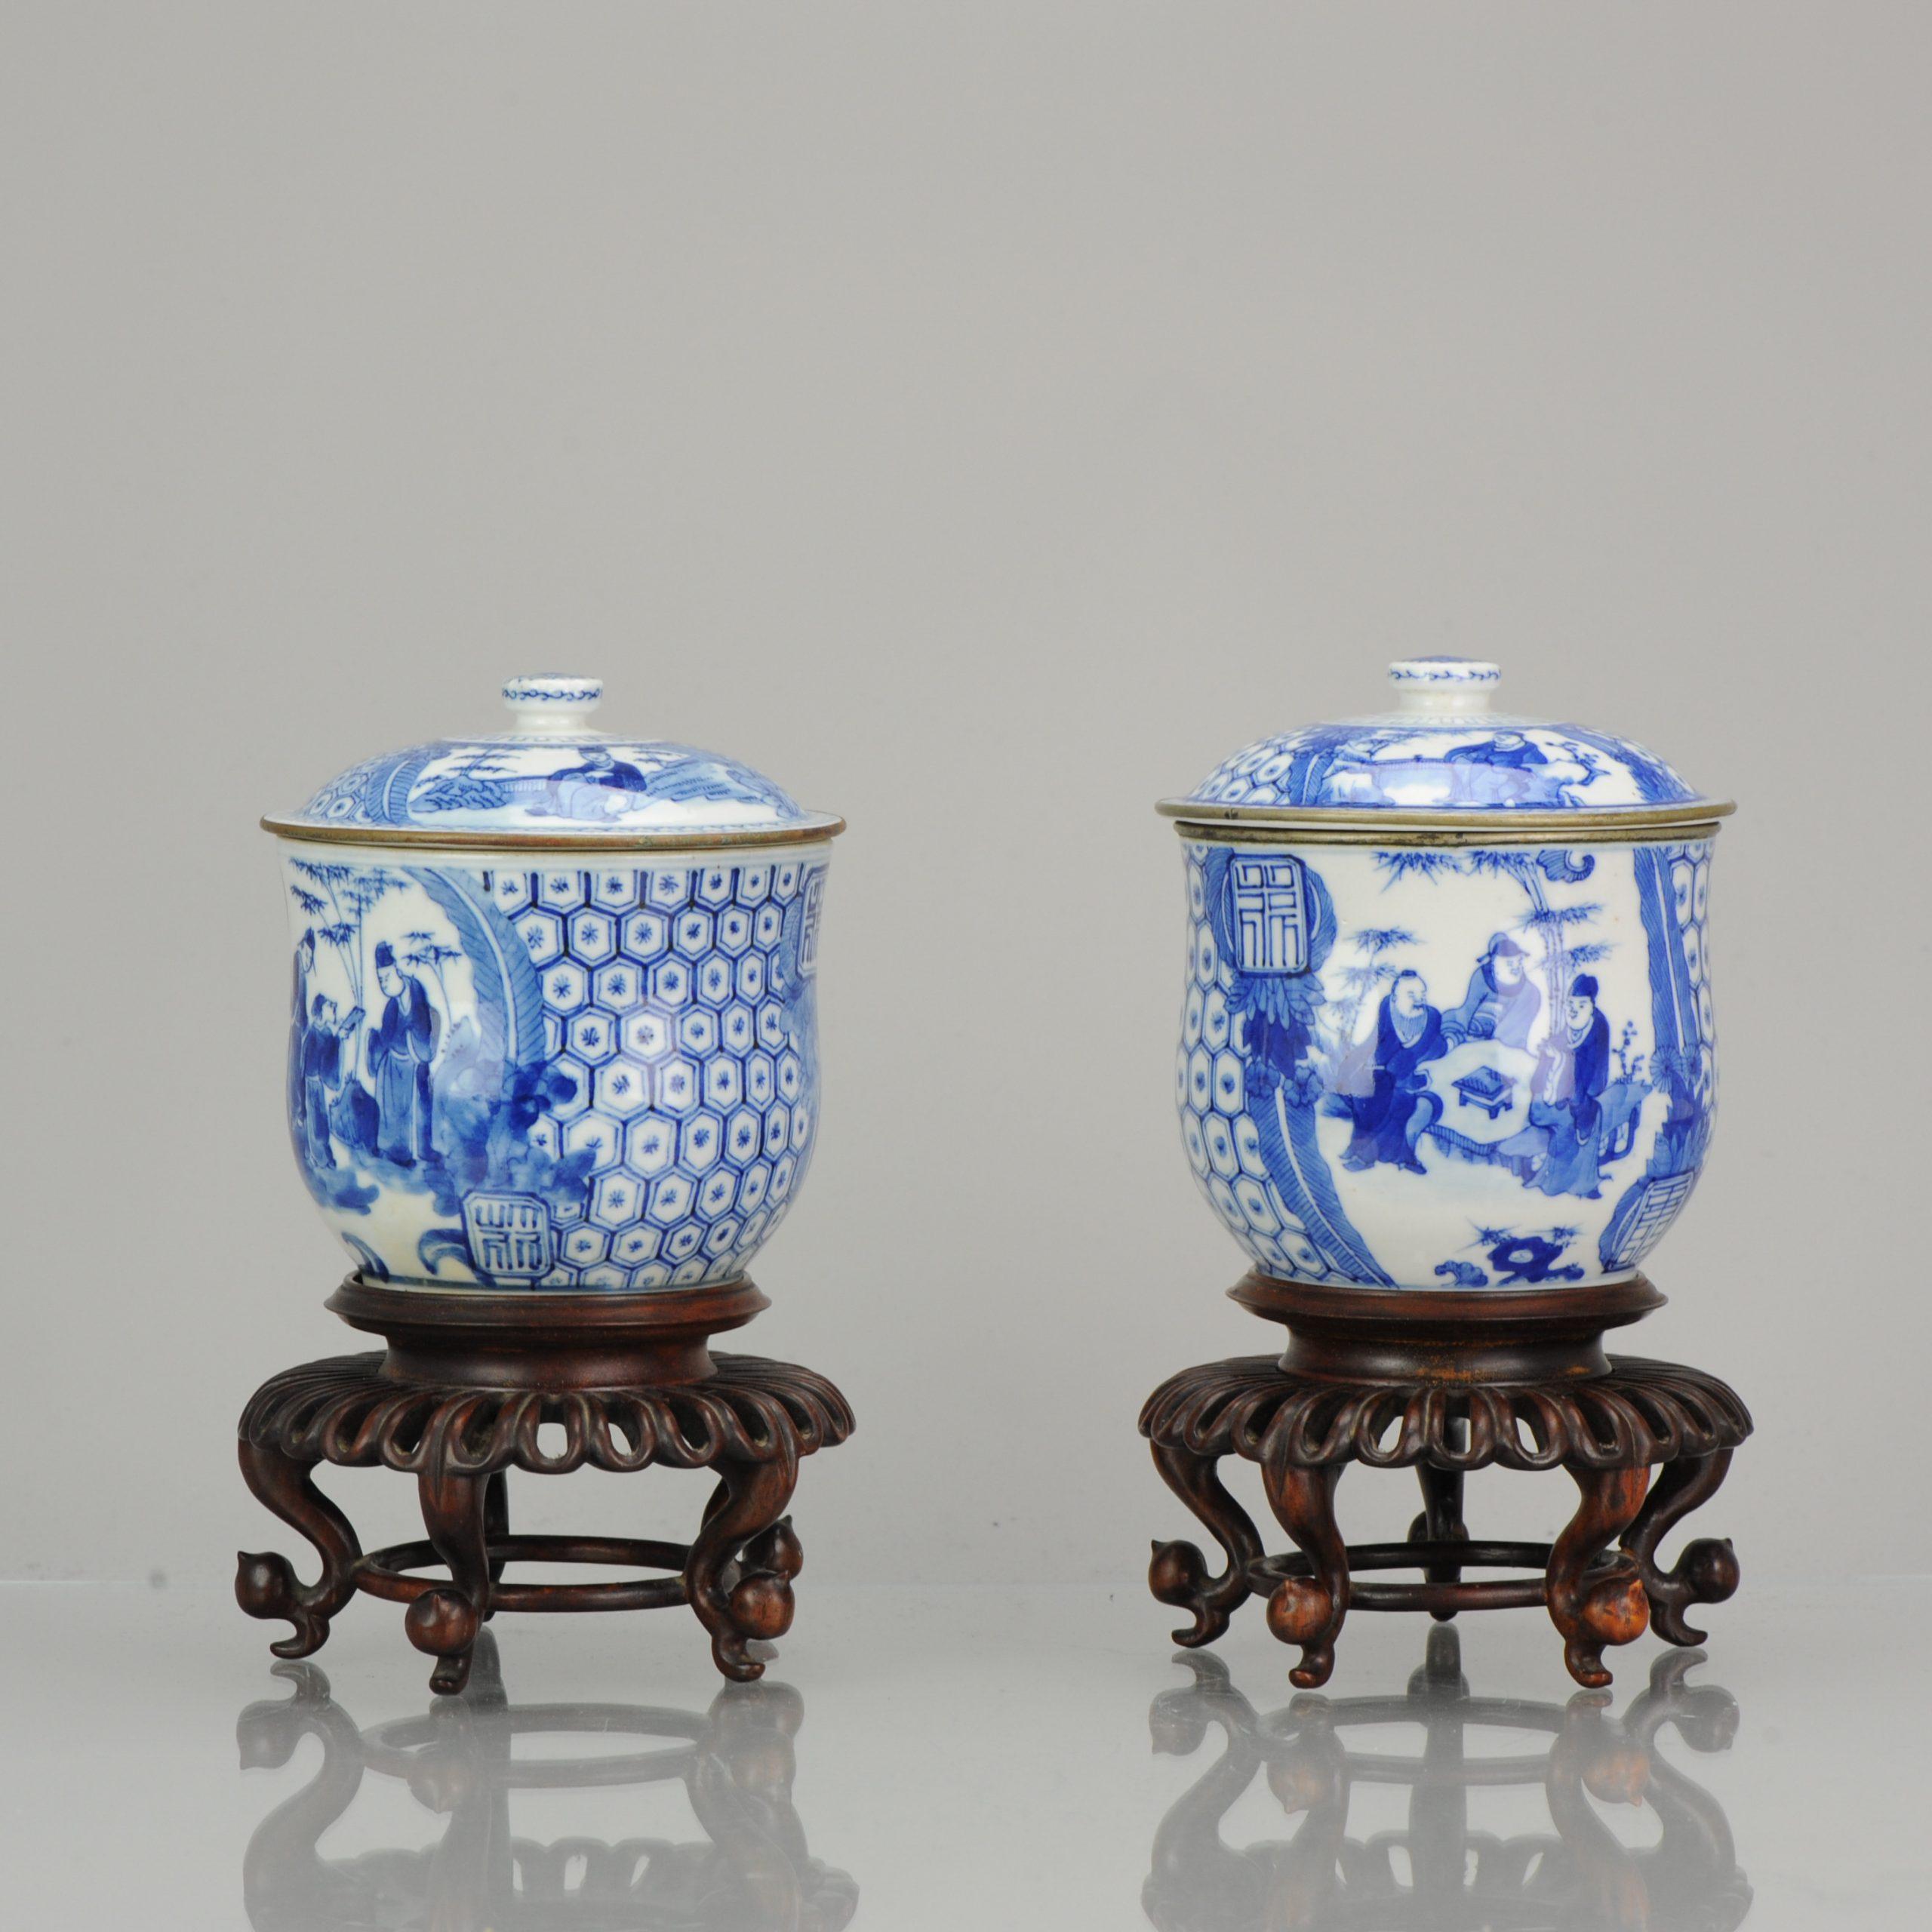 A top quality Bleu de Hue pair of lidded jars with figures and marks. China, 19th century. For the Vietnamese market

Marked:

Nei Fu, and can be translated as 